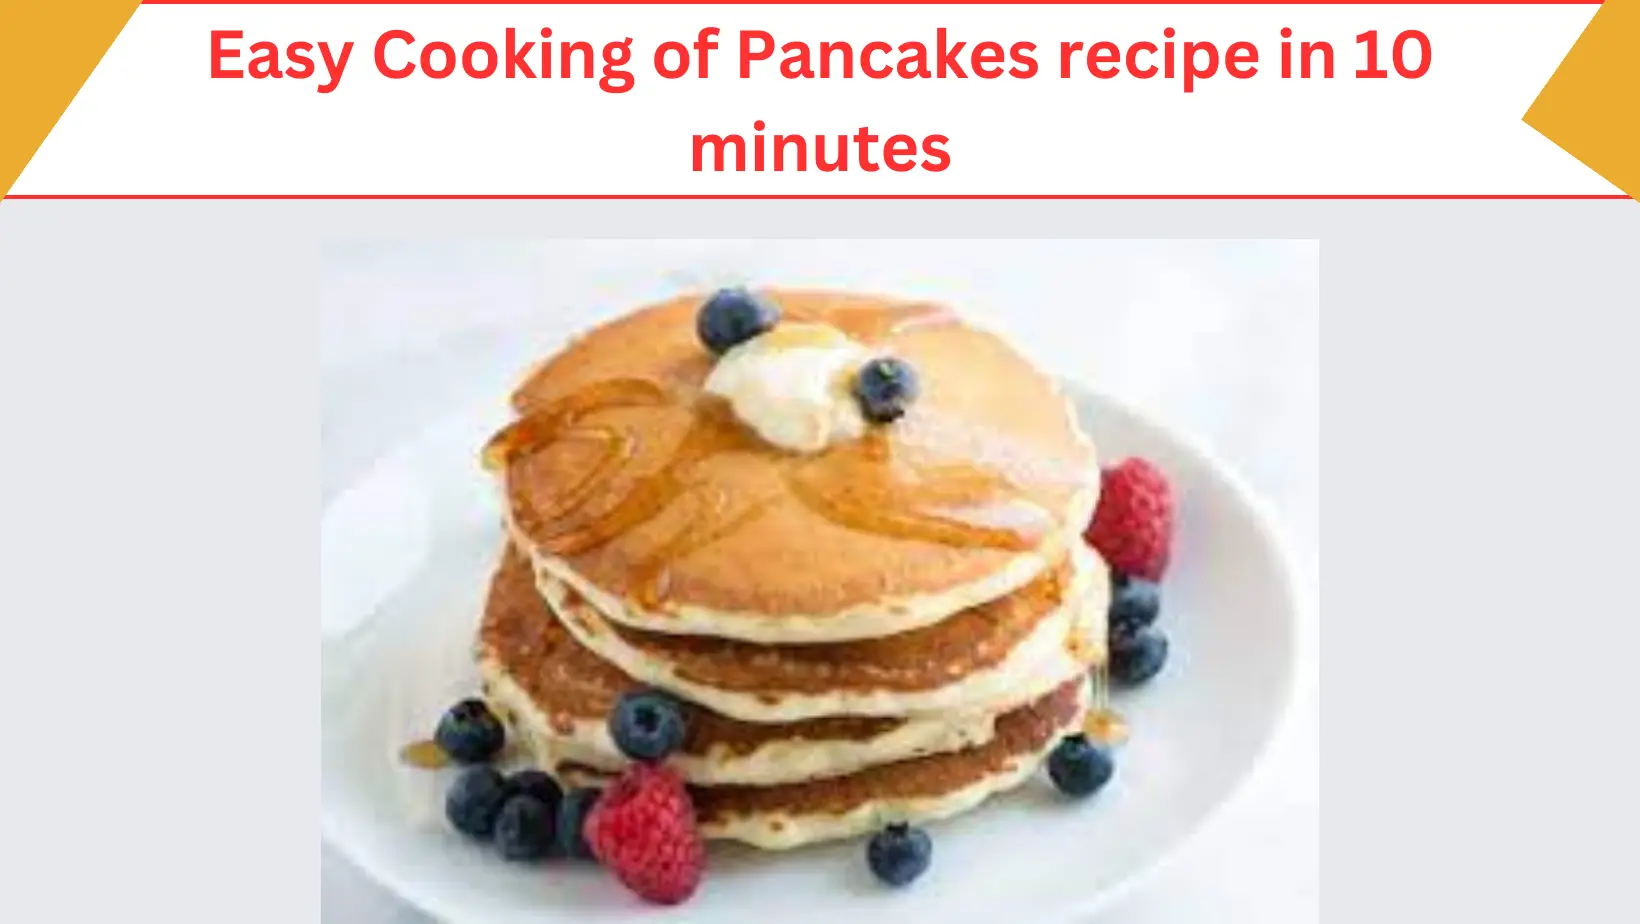 Easy Cooking of Pancakes recipe in 10 minutes